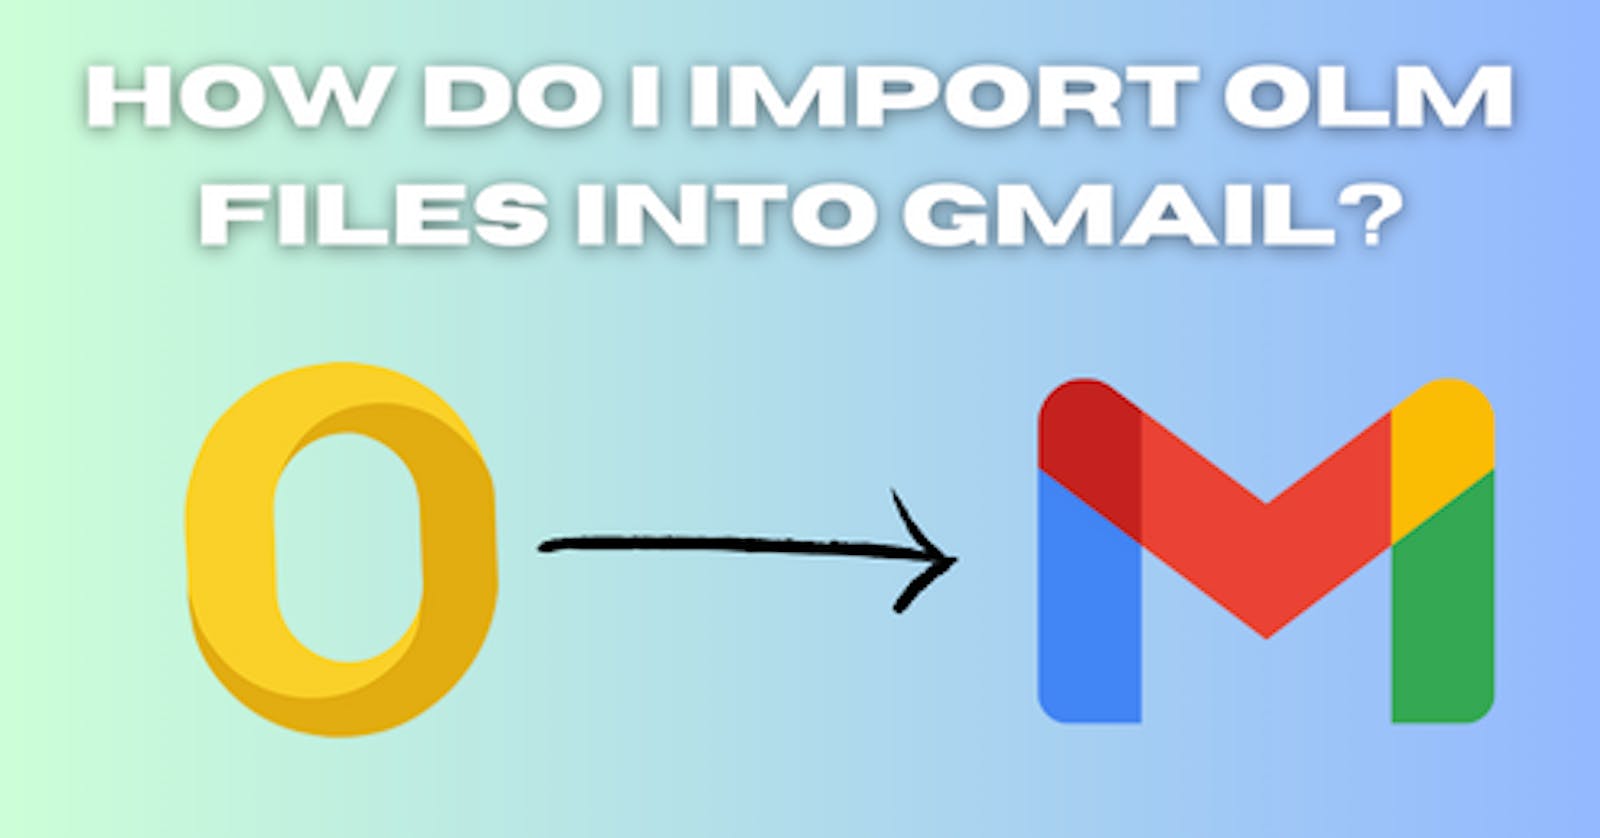 How Do I Import OLM Files into Gmail?